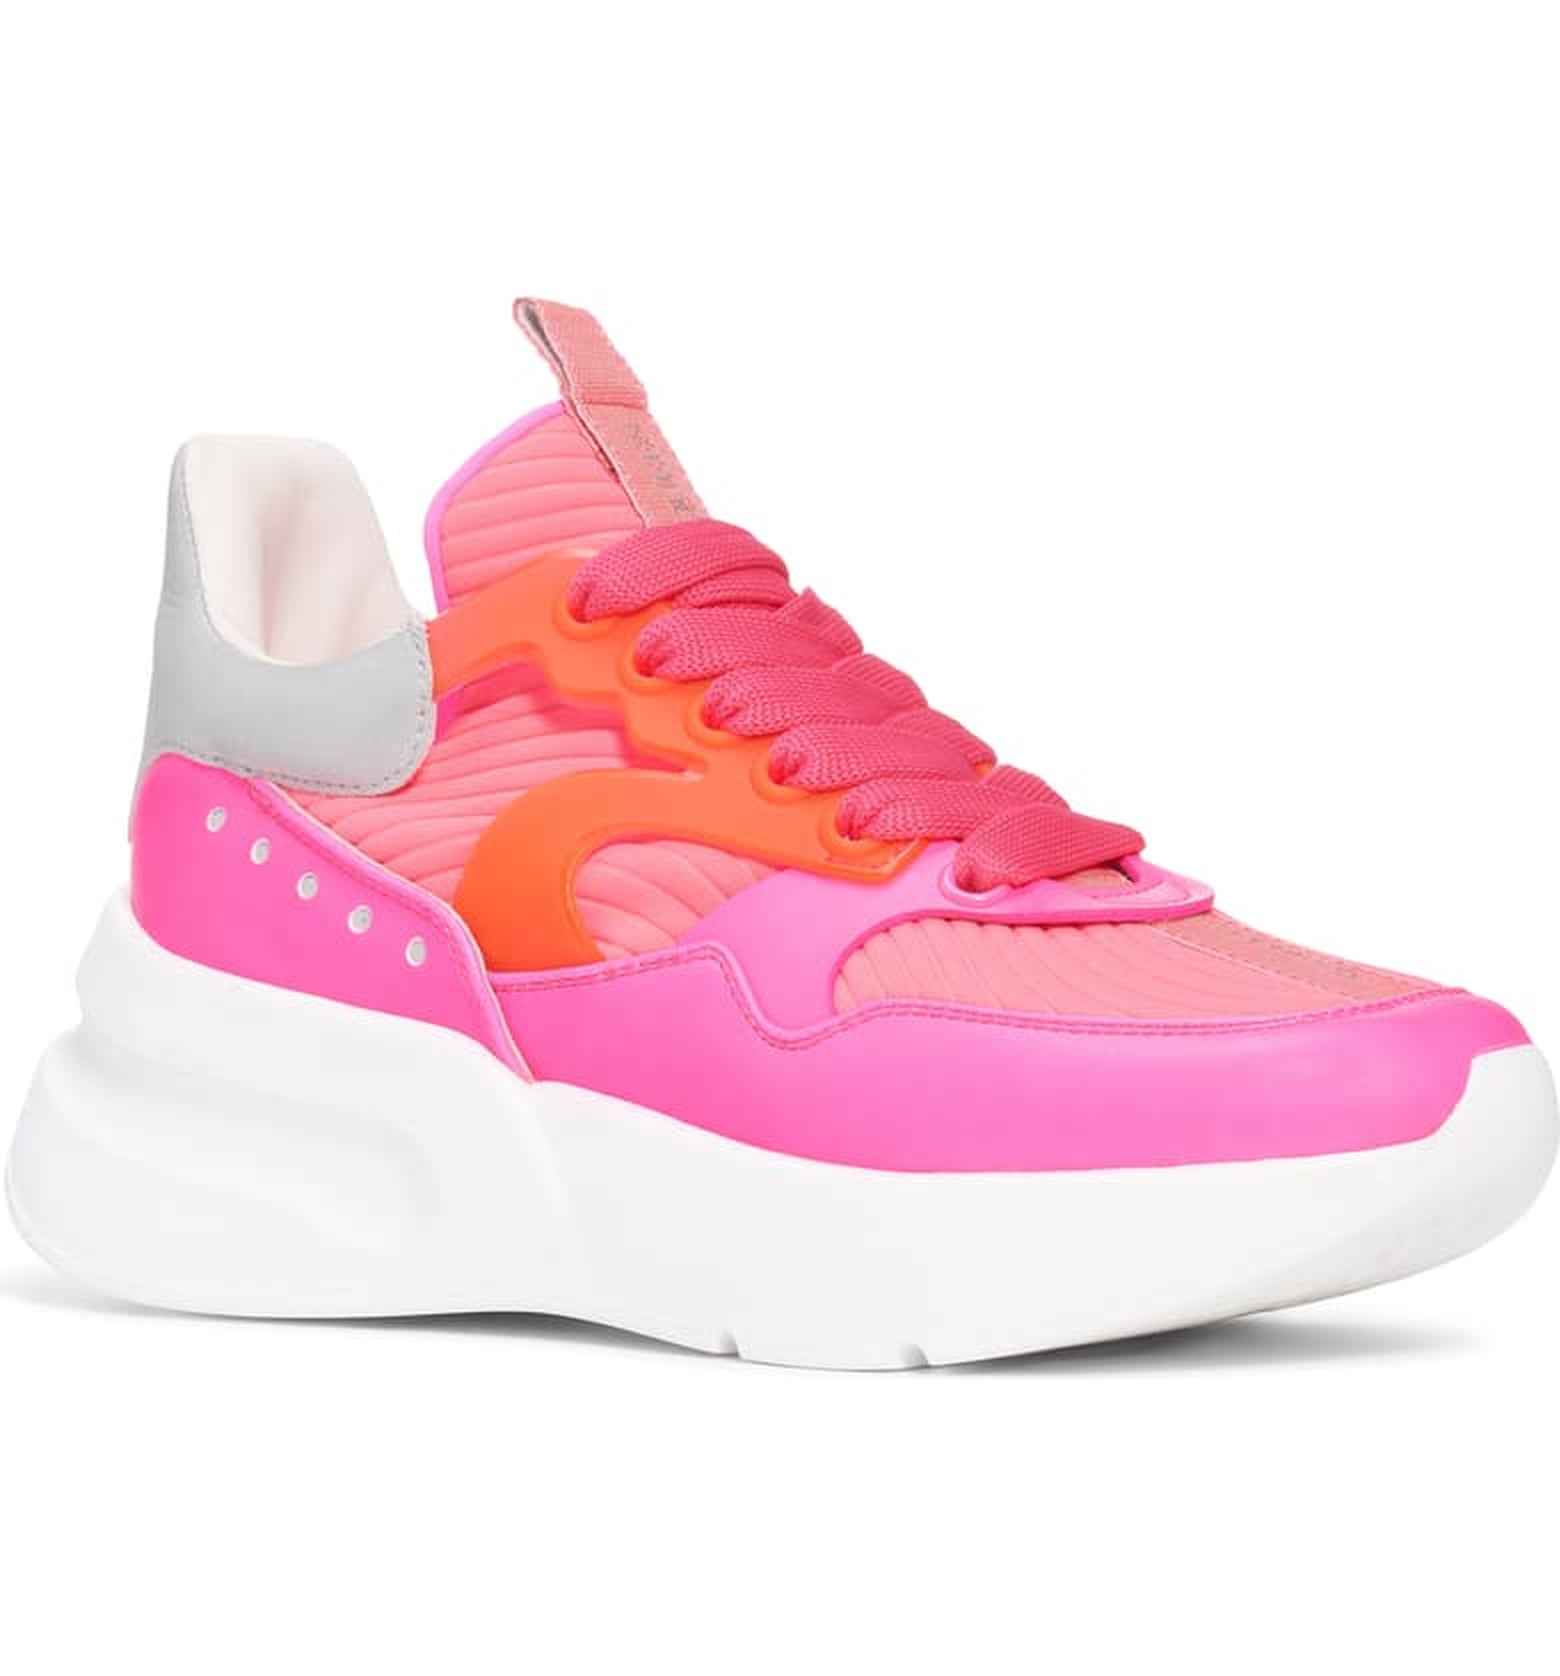 Best New Sneakers For Women at Nordstrom 2020 | POPSUGAR Fashion